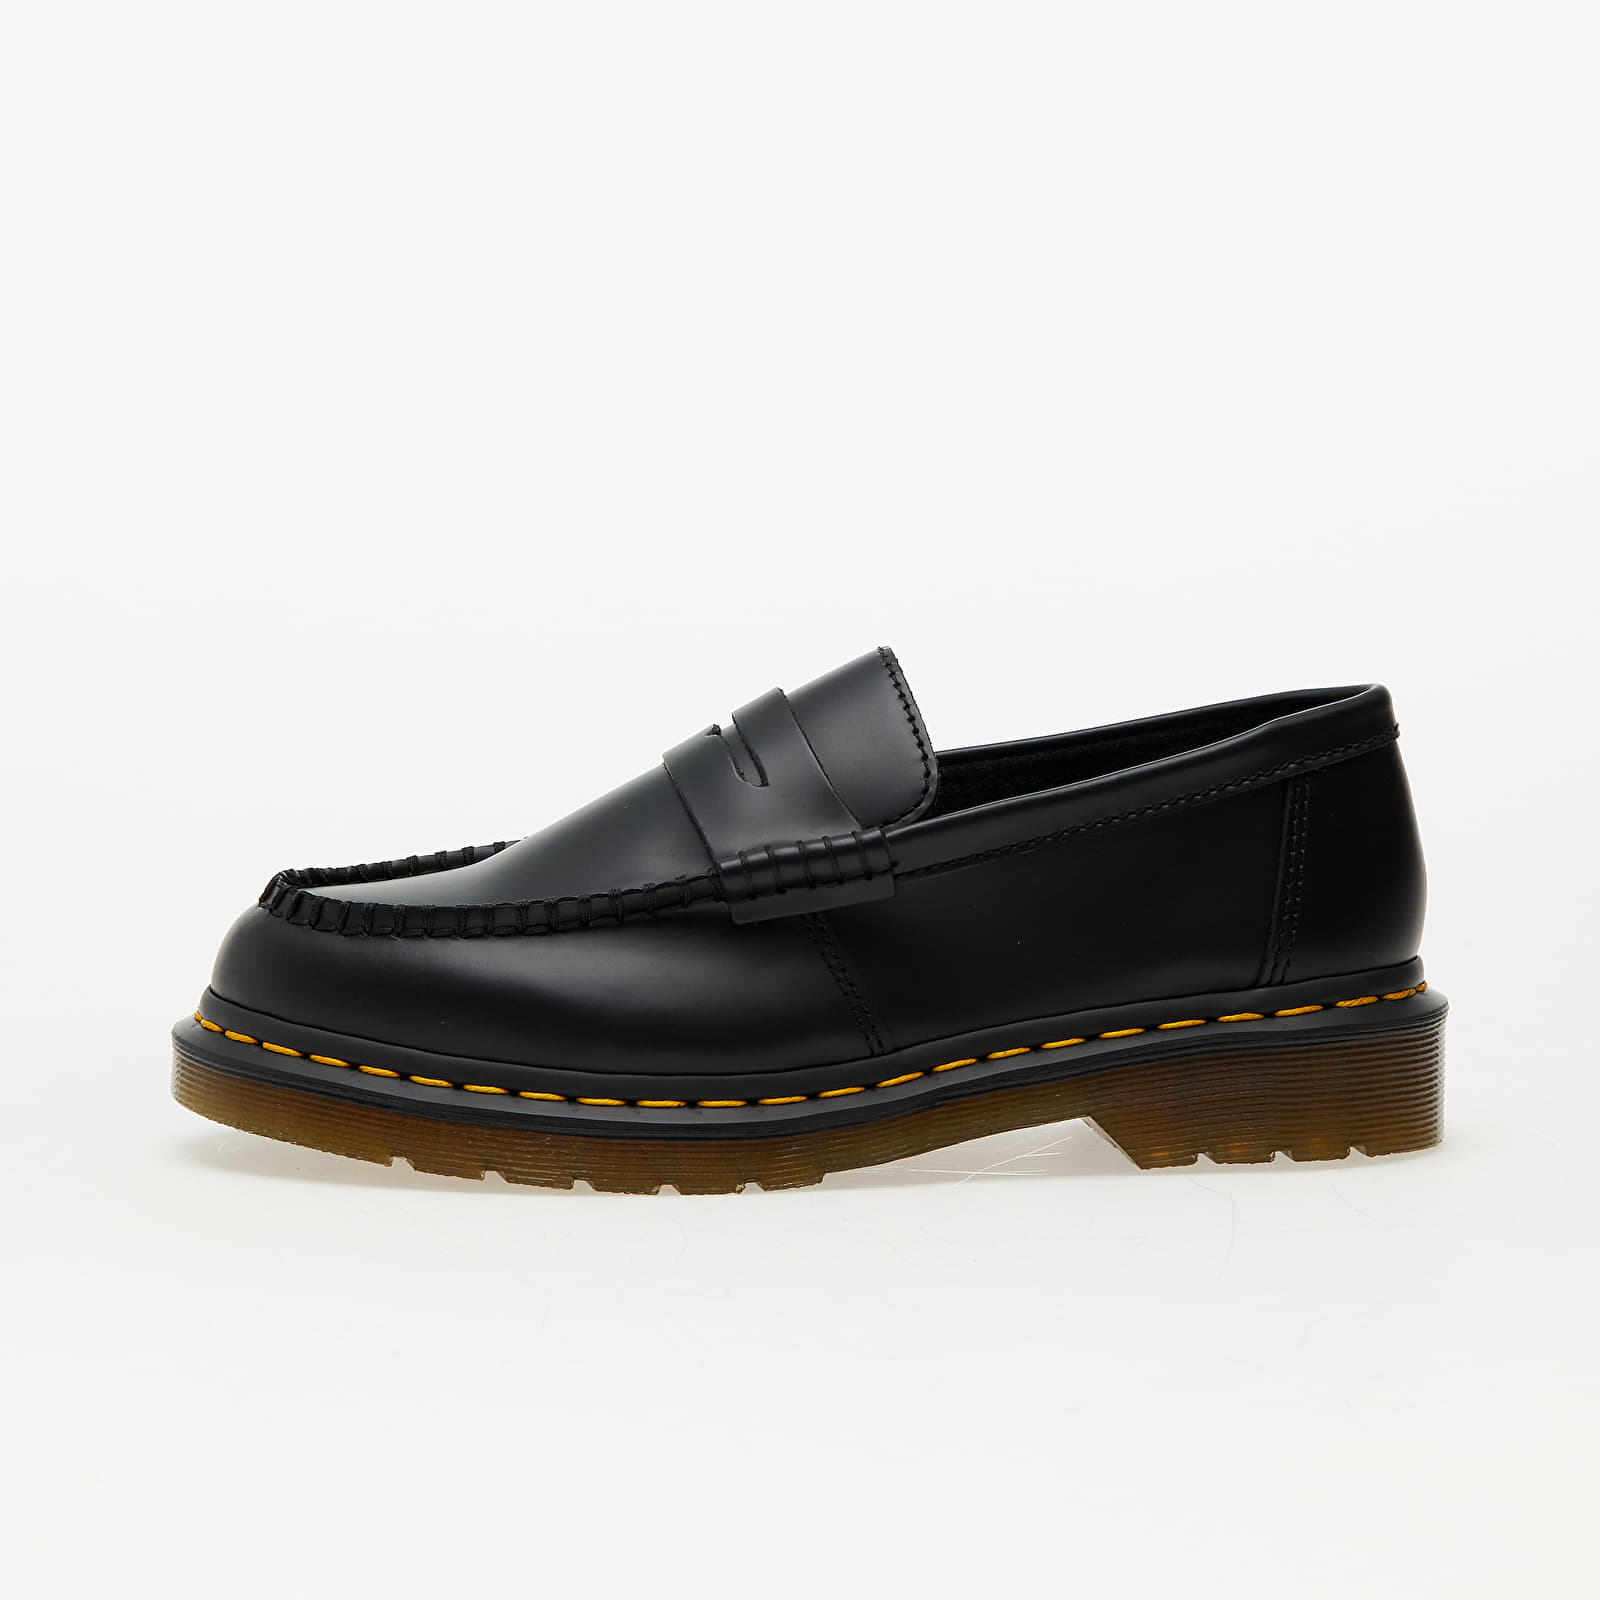 Dr. Martens - penton smooth leather loafers black smooth